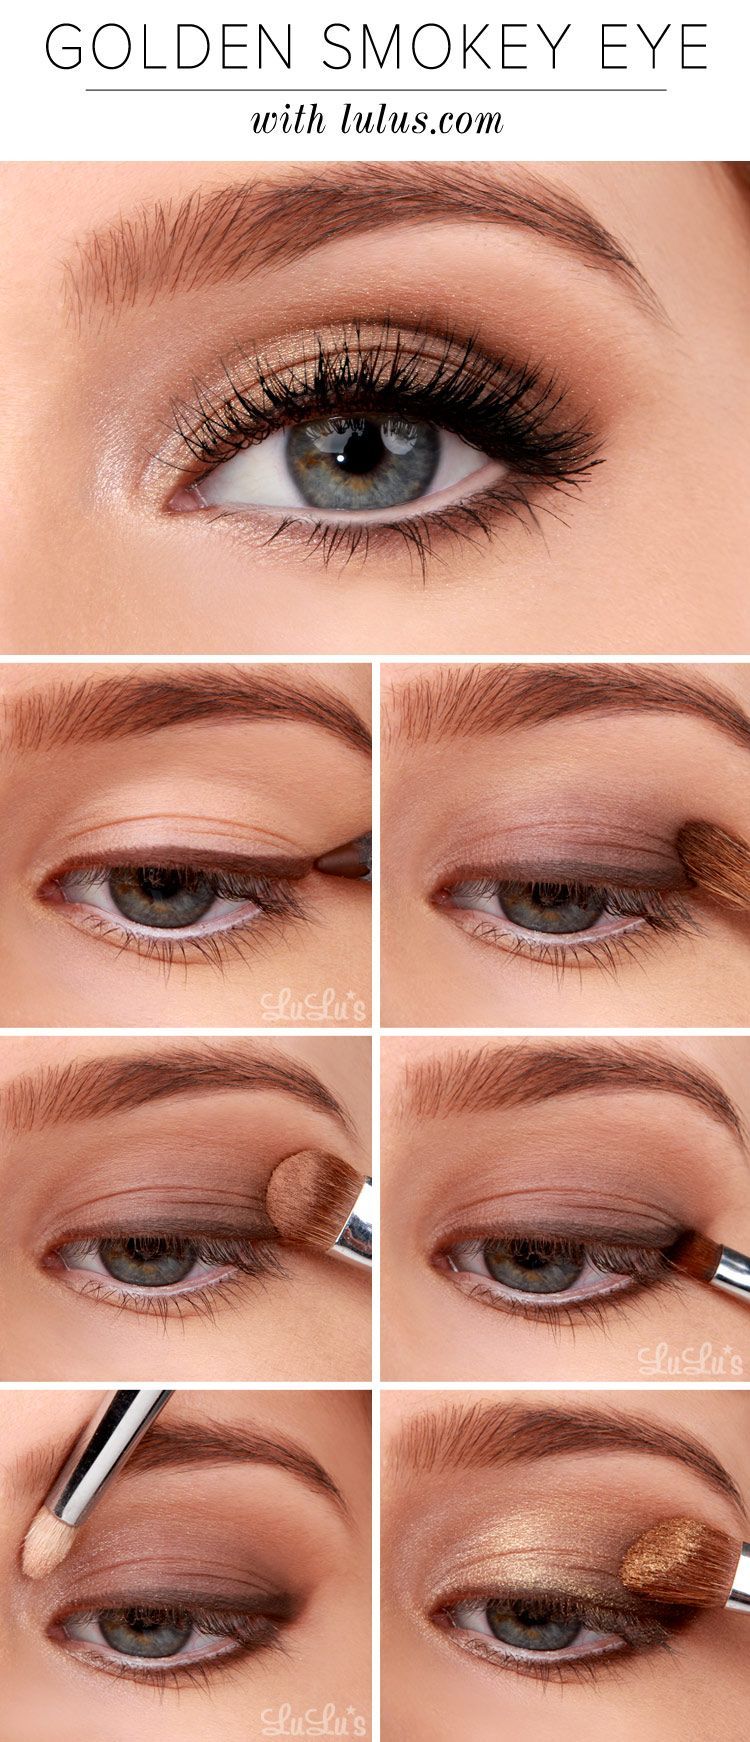 You’ve seen a smokey eye before, but not quite like this! Check out our Golden Smokey Eyeshadow Tutorial on the blog now!